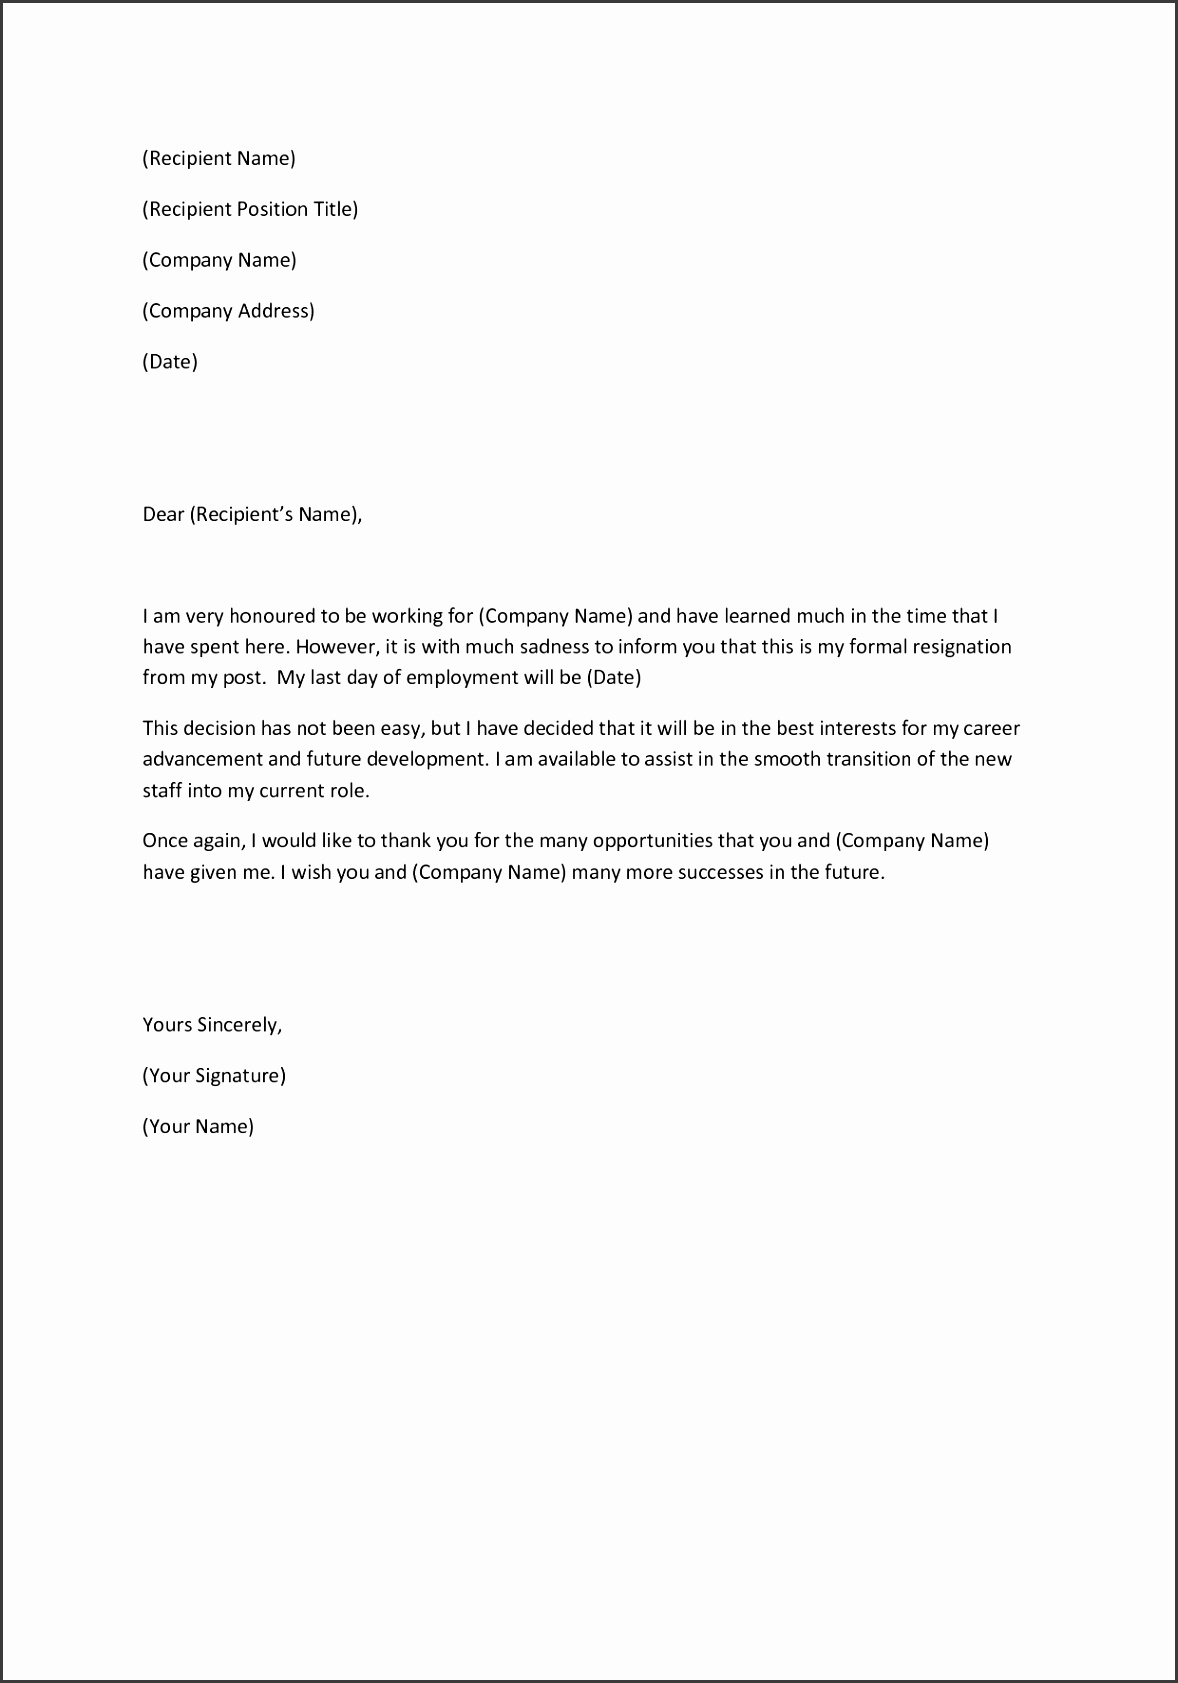 corporate resignation letter sample i am very honoured to be working for pany and have learned much in the time that i spent here letter format and resume